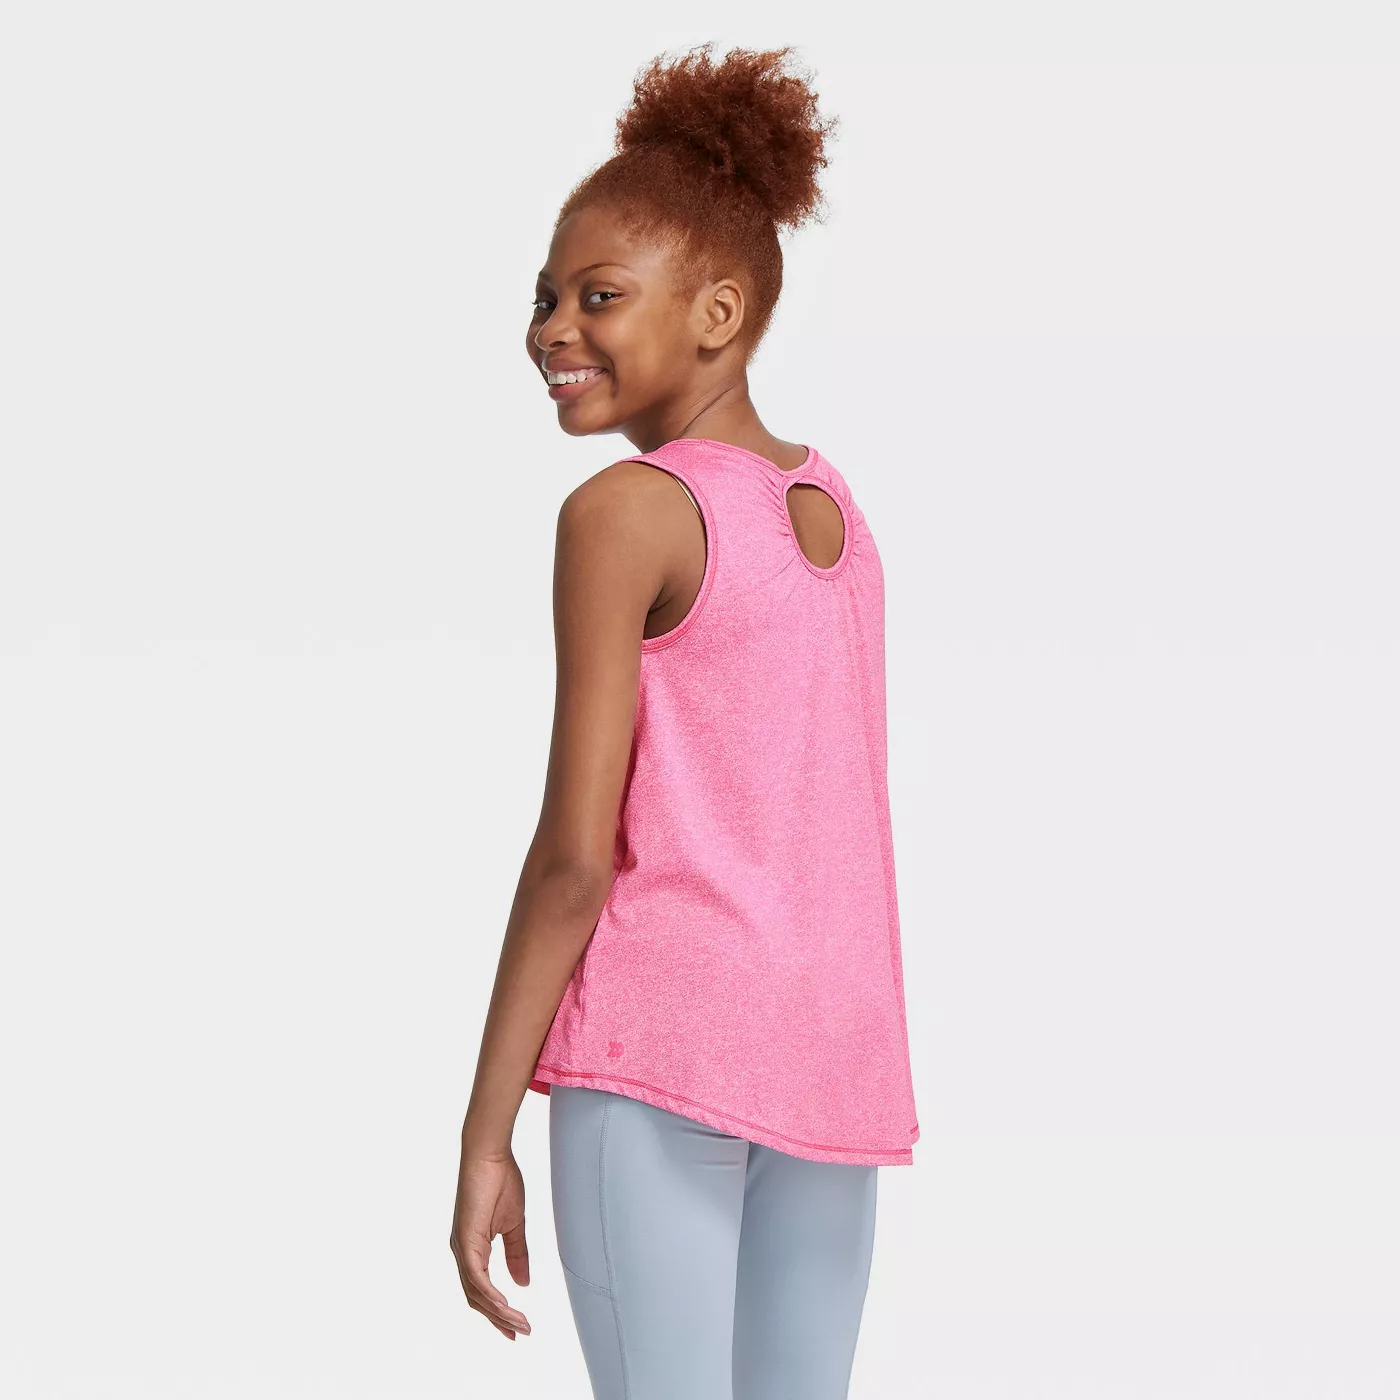 Girls' Studio Tank Top - All in Motion™ - image 1 of 4